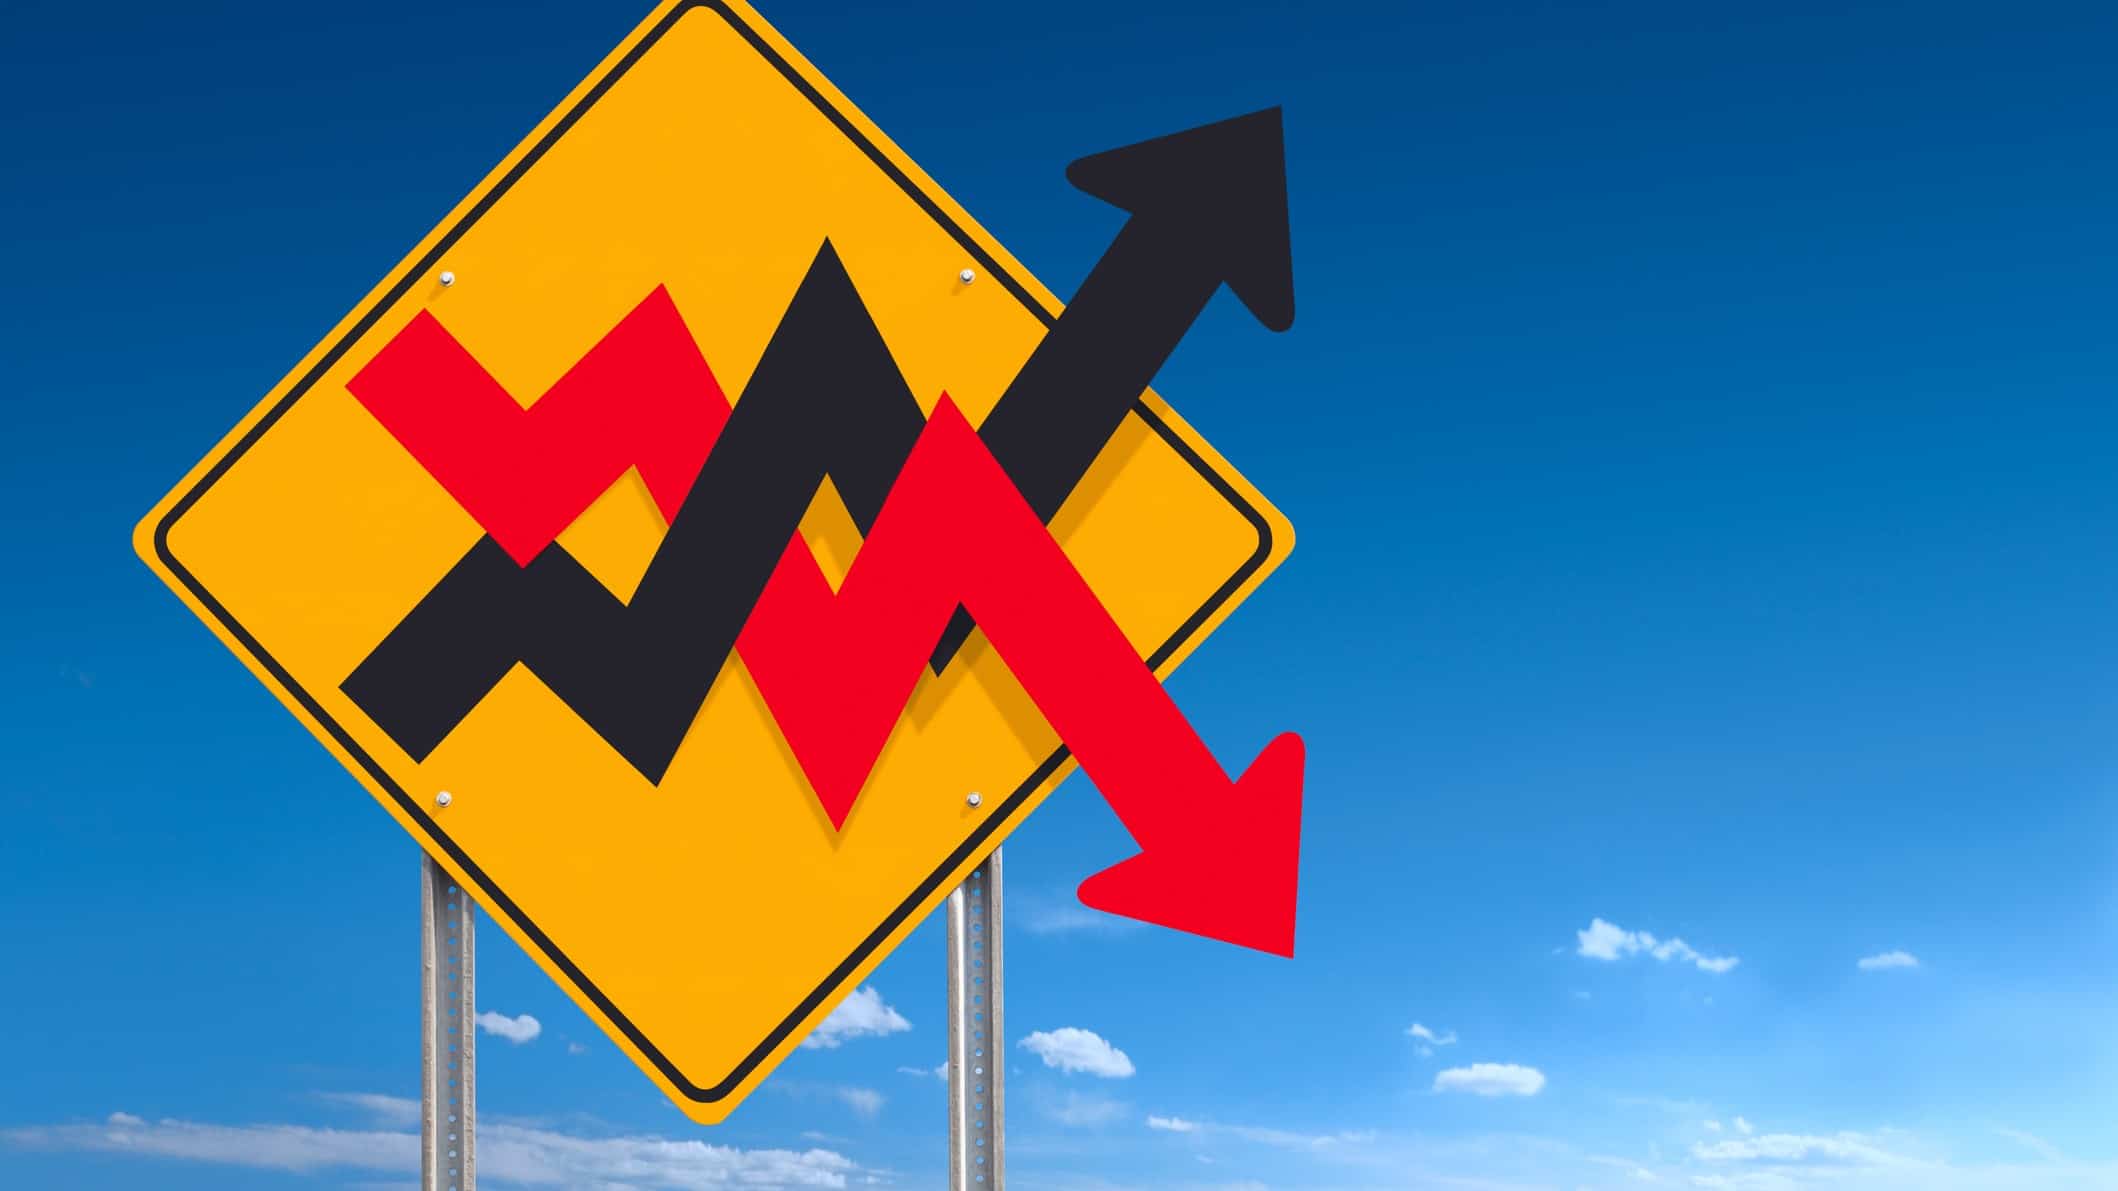 A yellow warning sign with black and red arrows going up and down, indicating ASX share market chaos